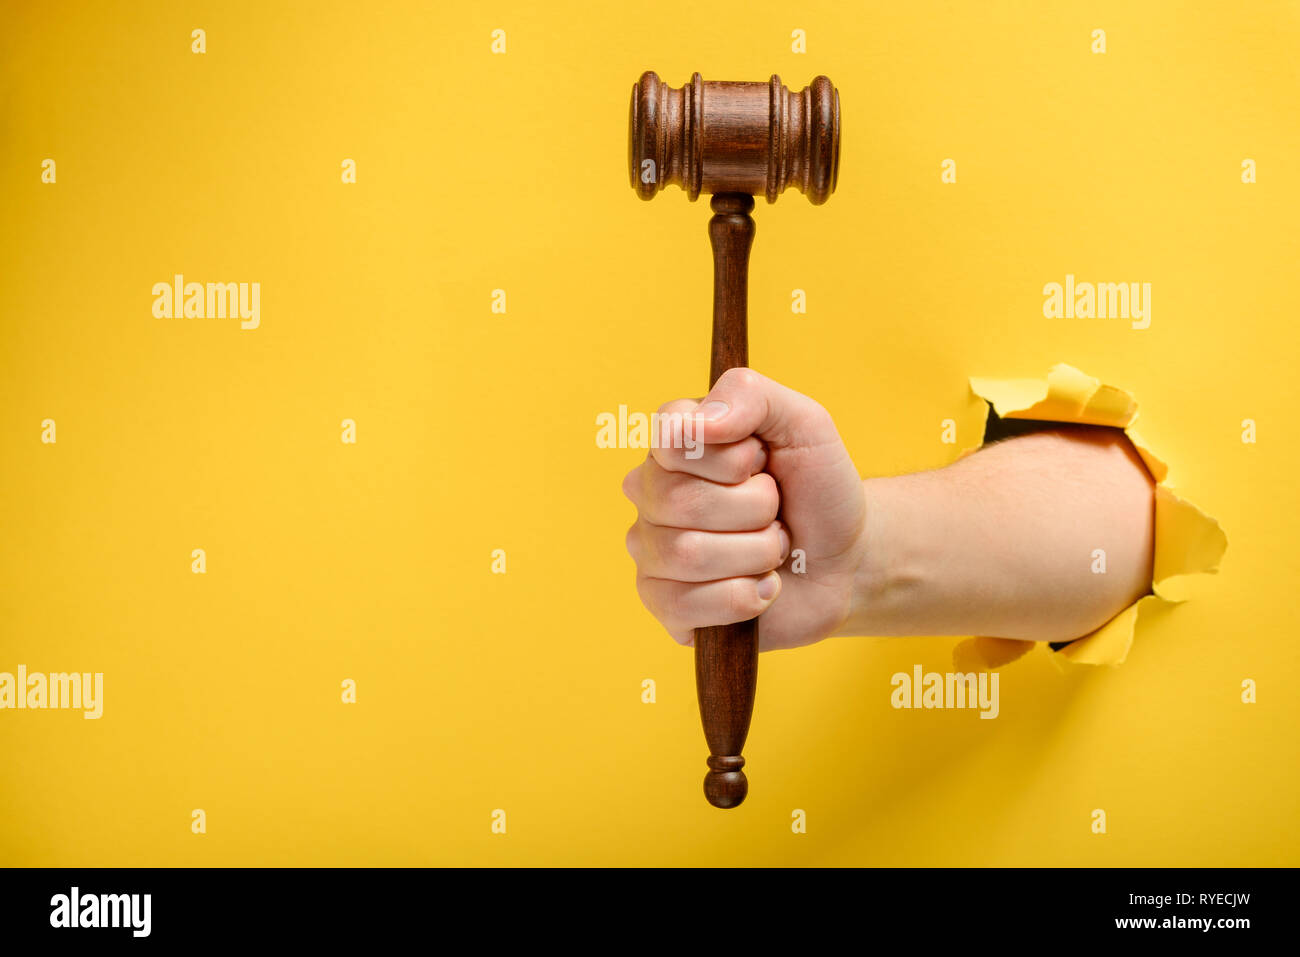 Auctioneer hold gavel in hand. Buyers raising arm holding bid paddles By  Tartila